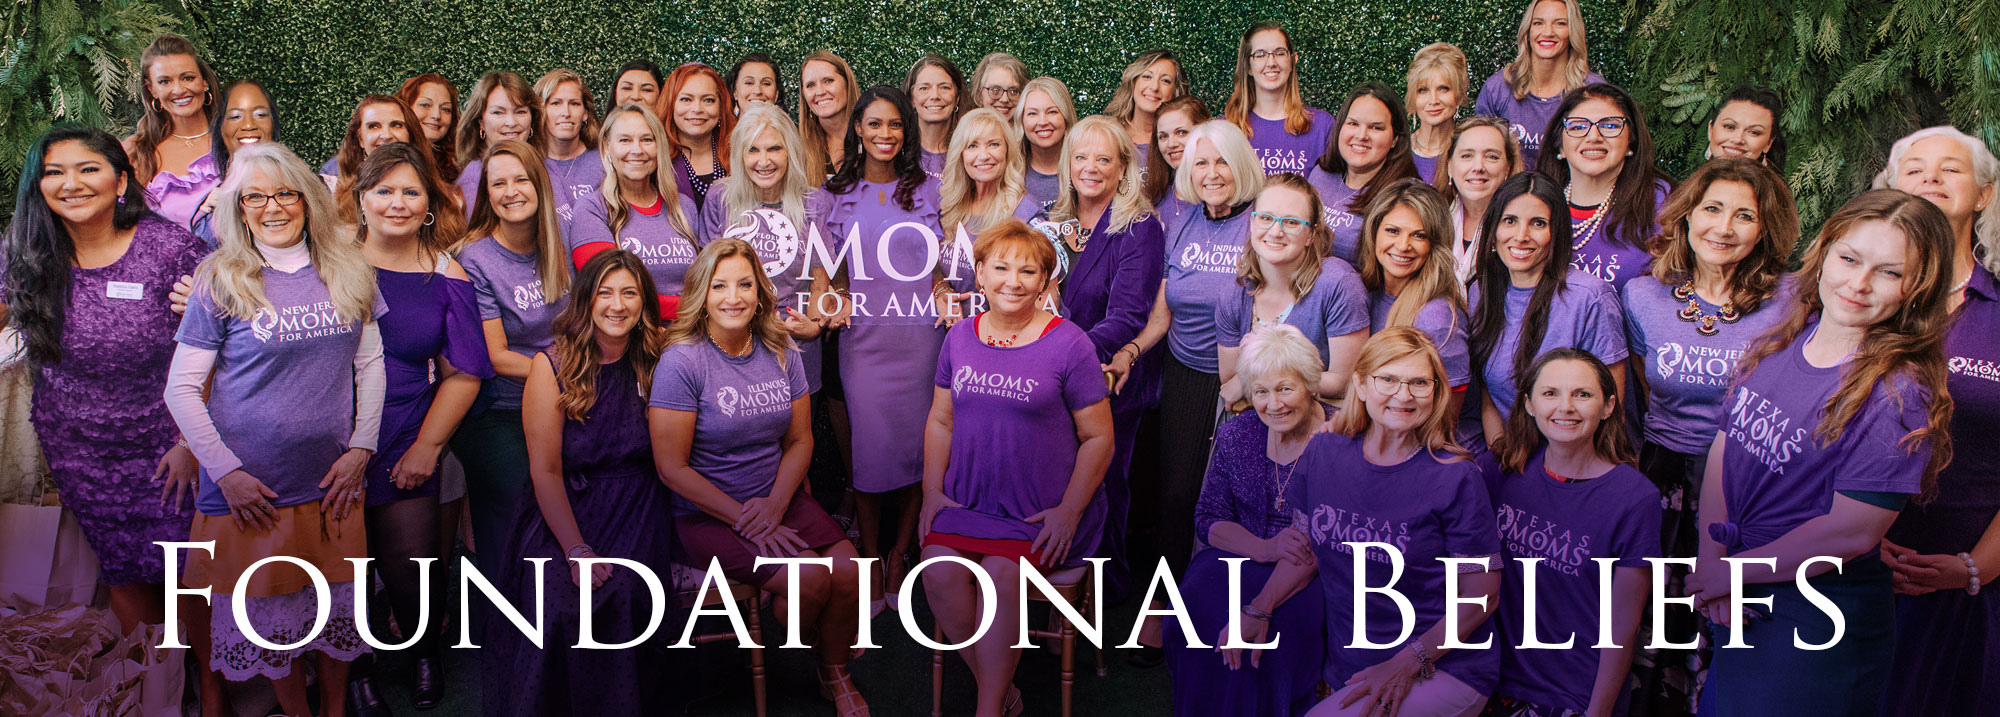 Our Three Fold Mission - Foundational Beliefs - Moms for America